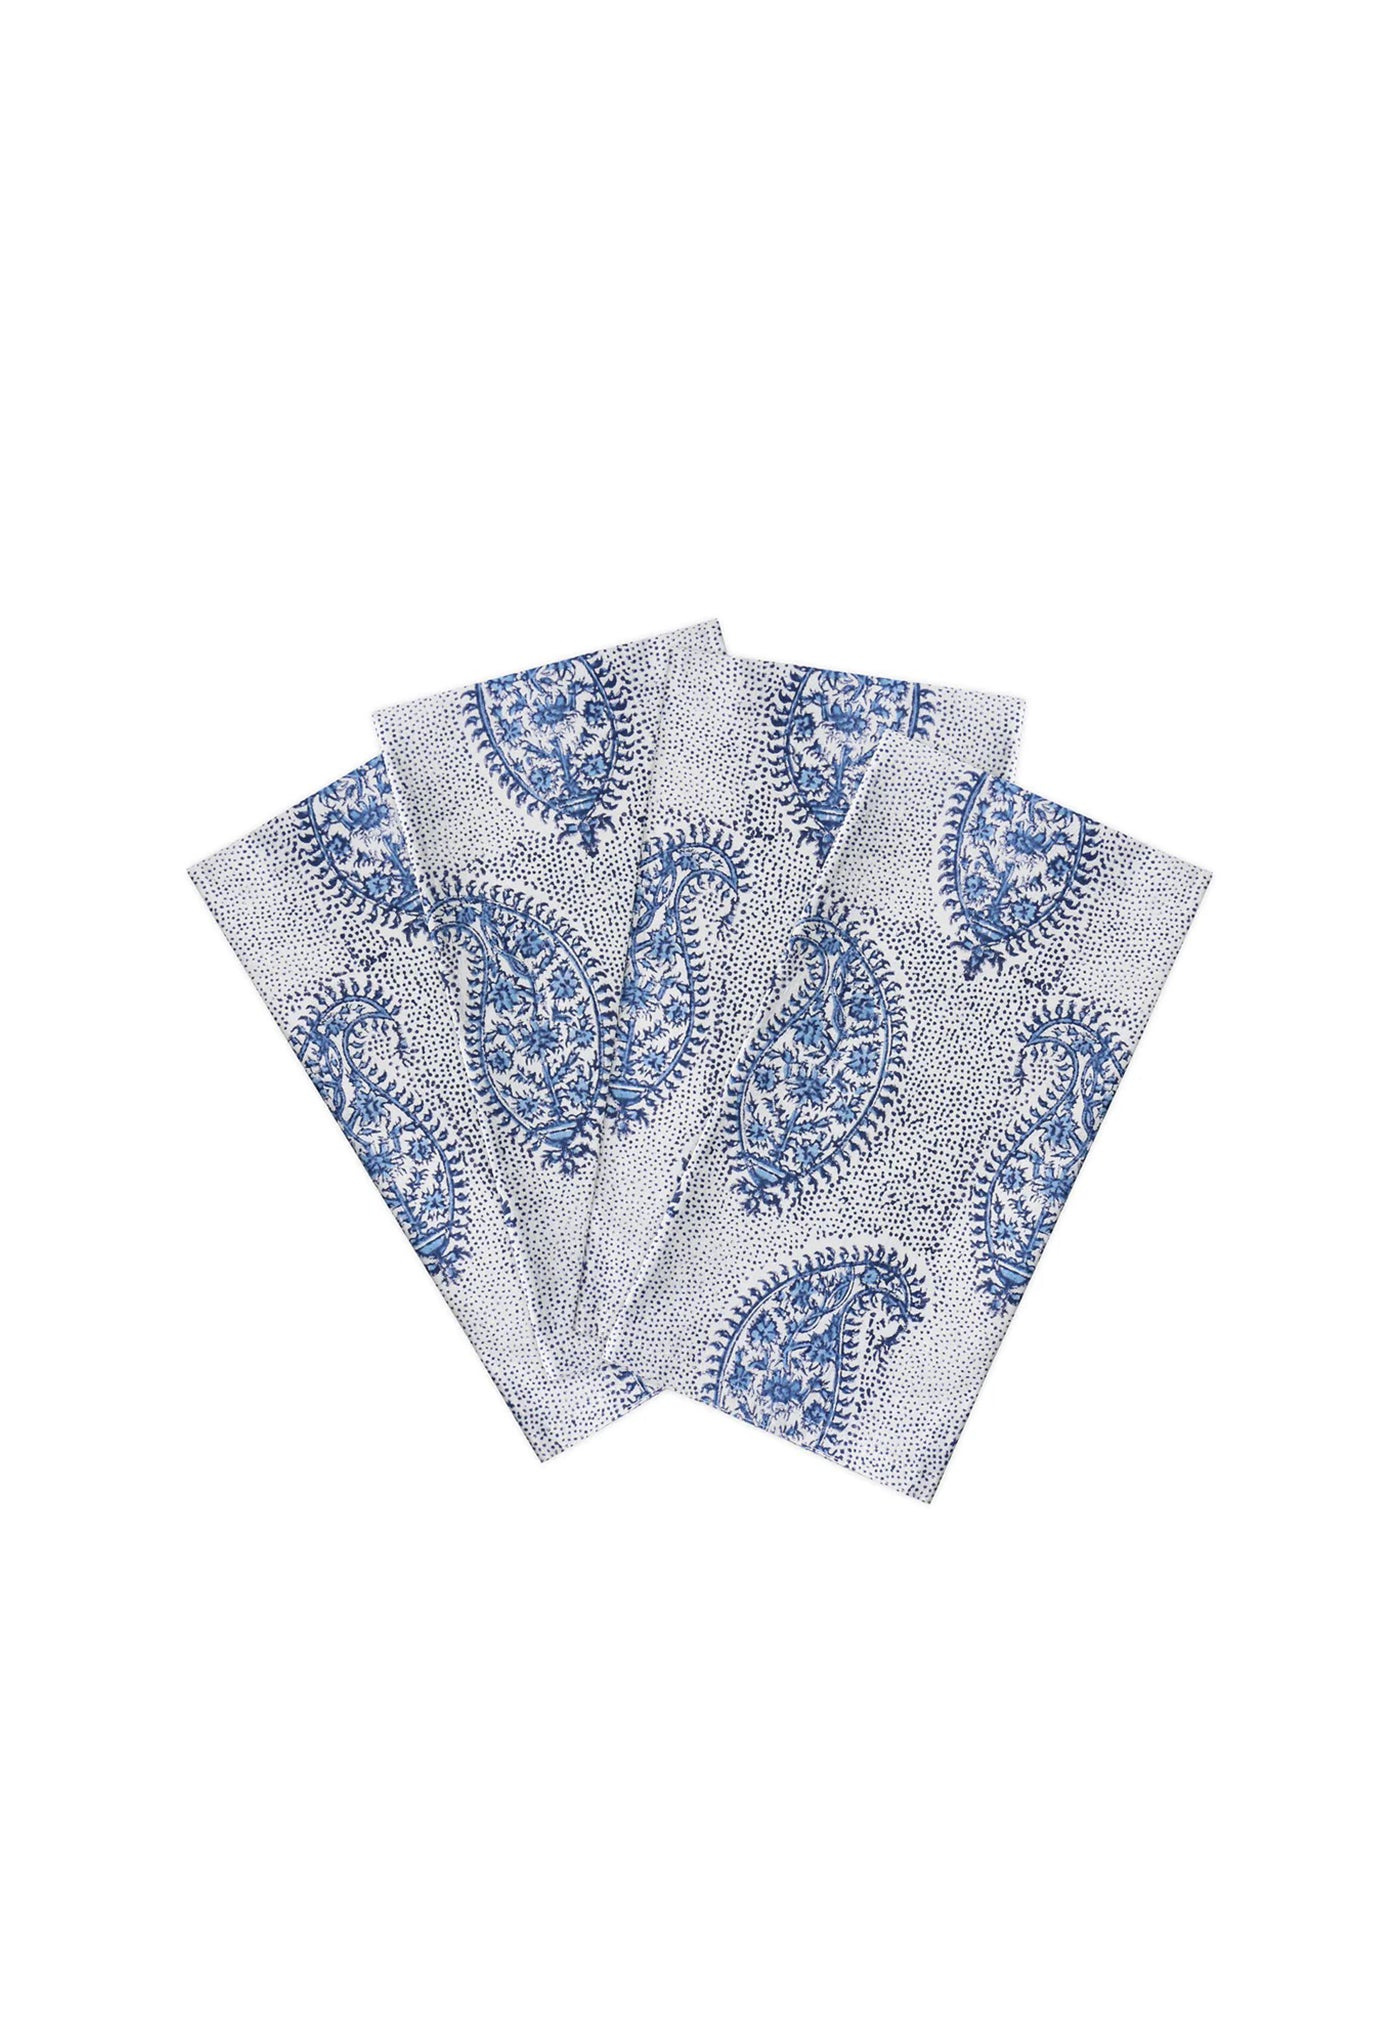 Paisley Azure Cotton Napkins (Set of 4) sold by Angel Divine